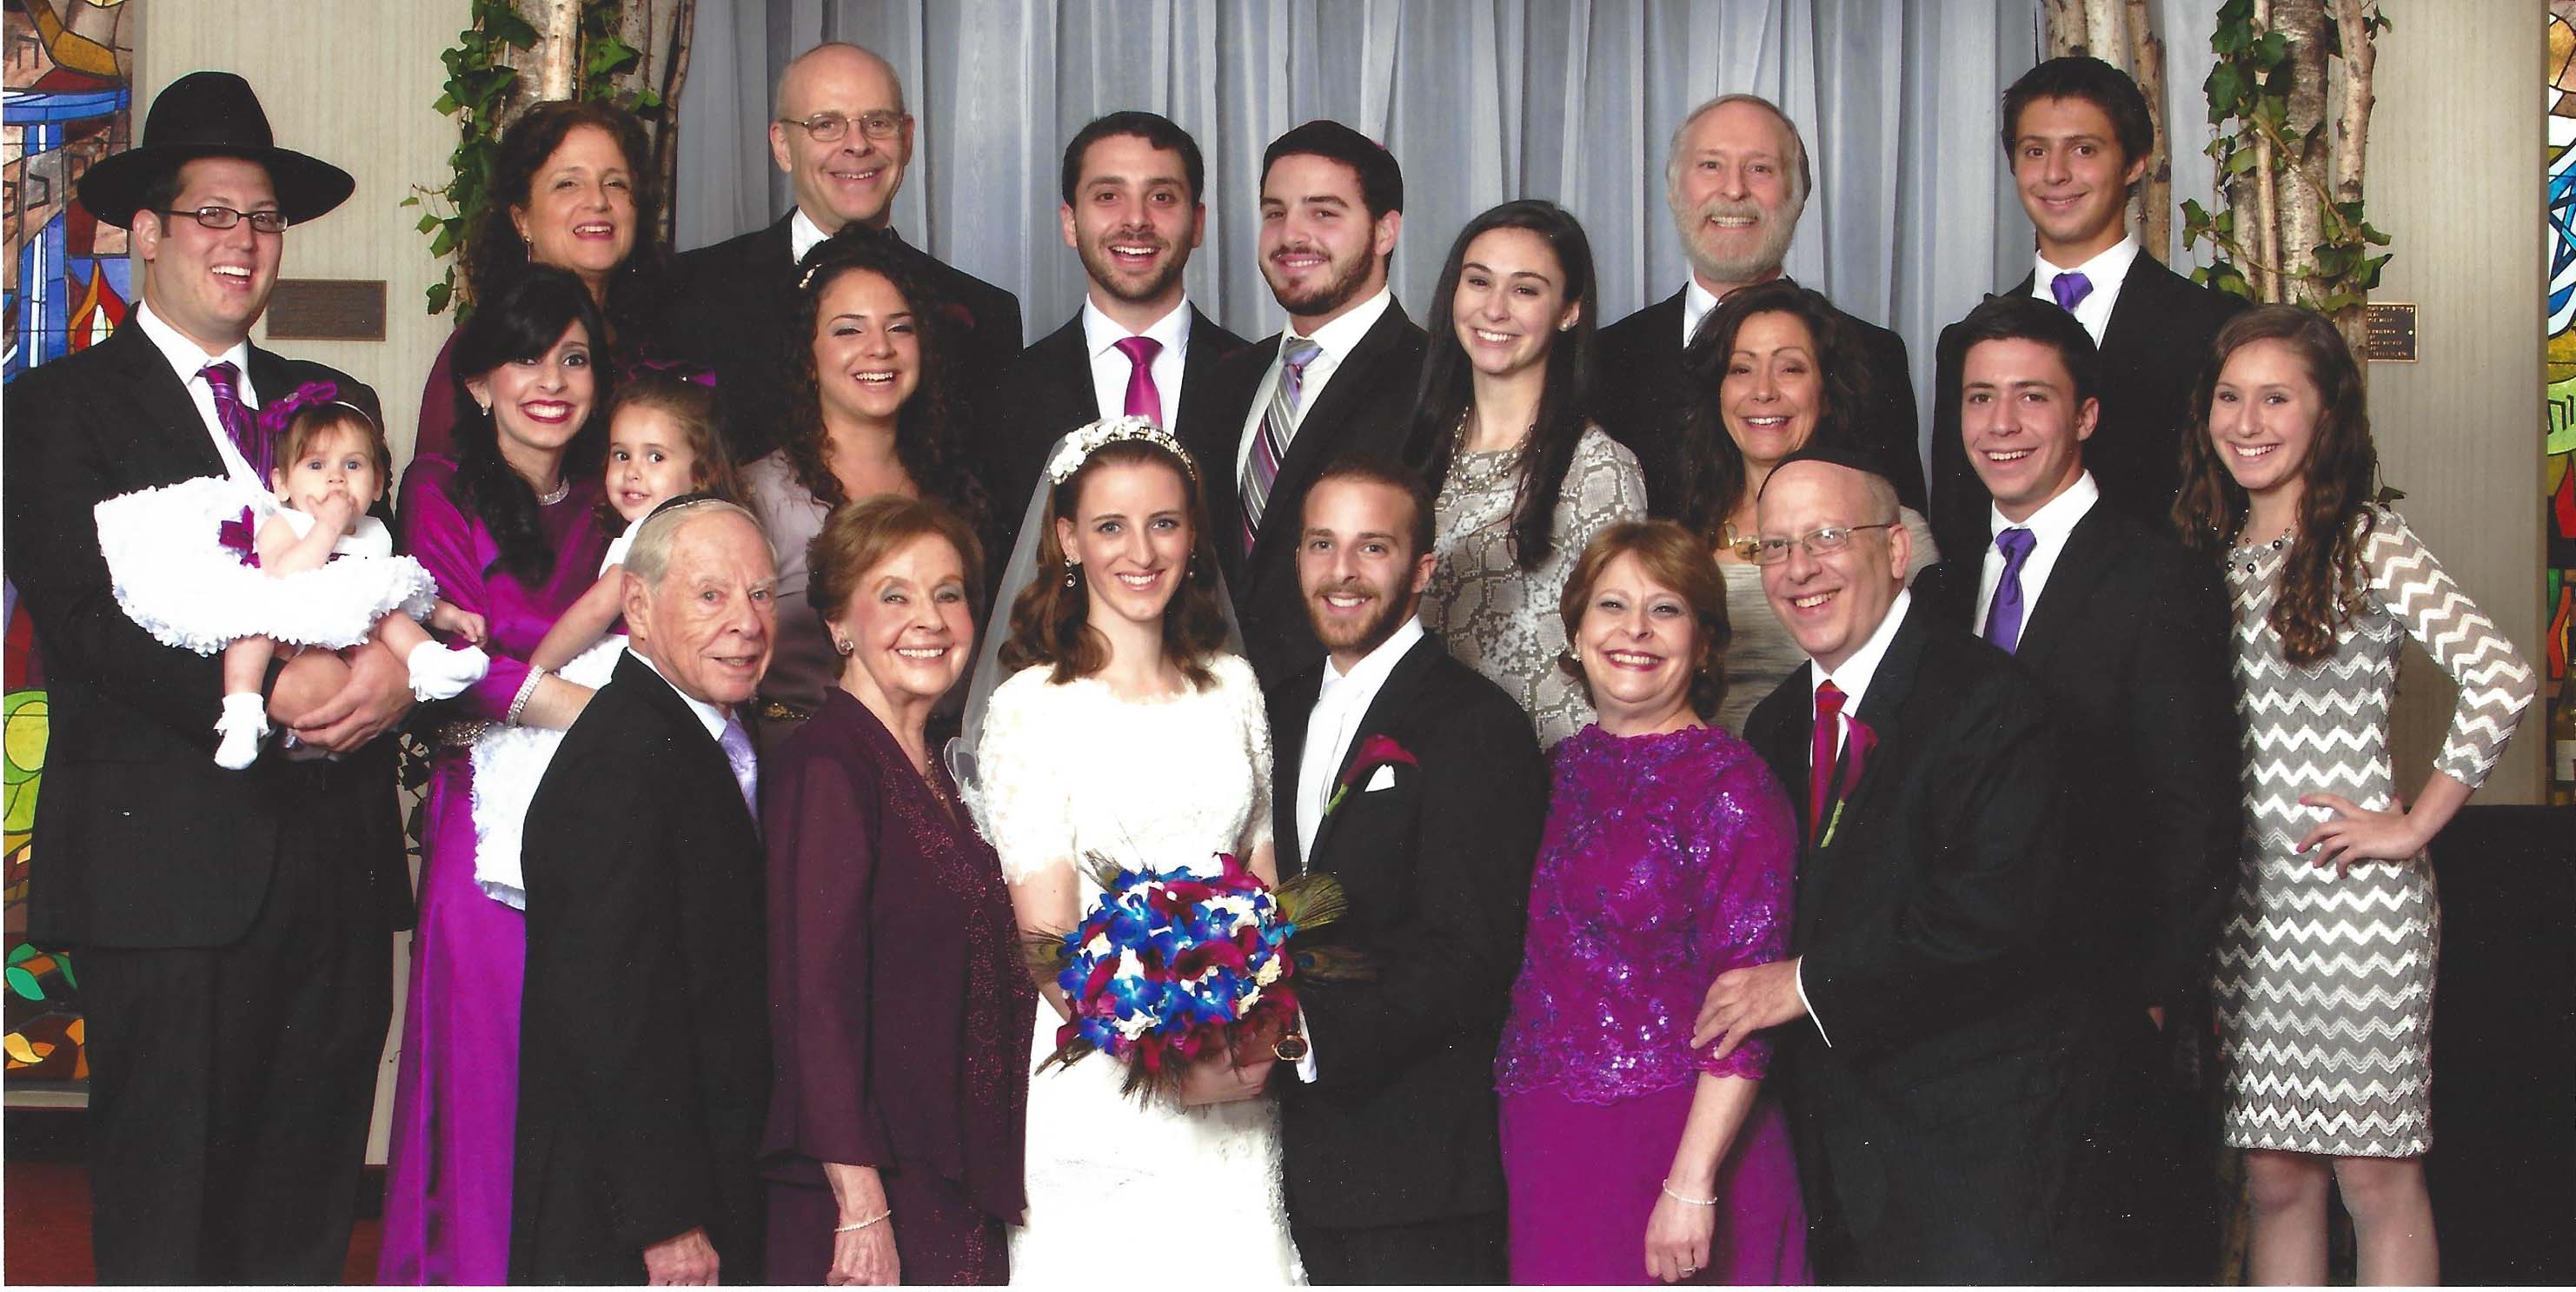 Marion and Nathaniel & Family, August 2014 at the wedding of Allysa and Joshua A story of survival and continuity.